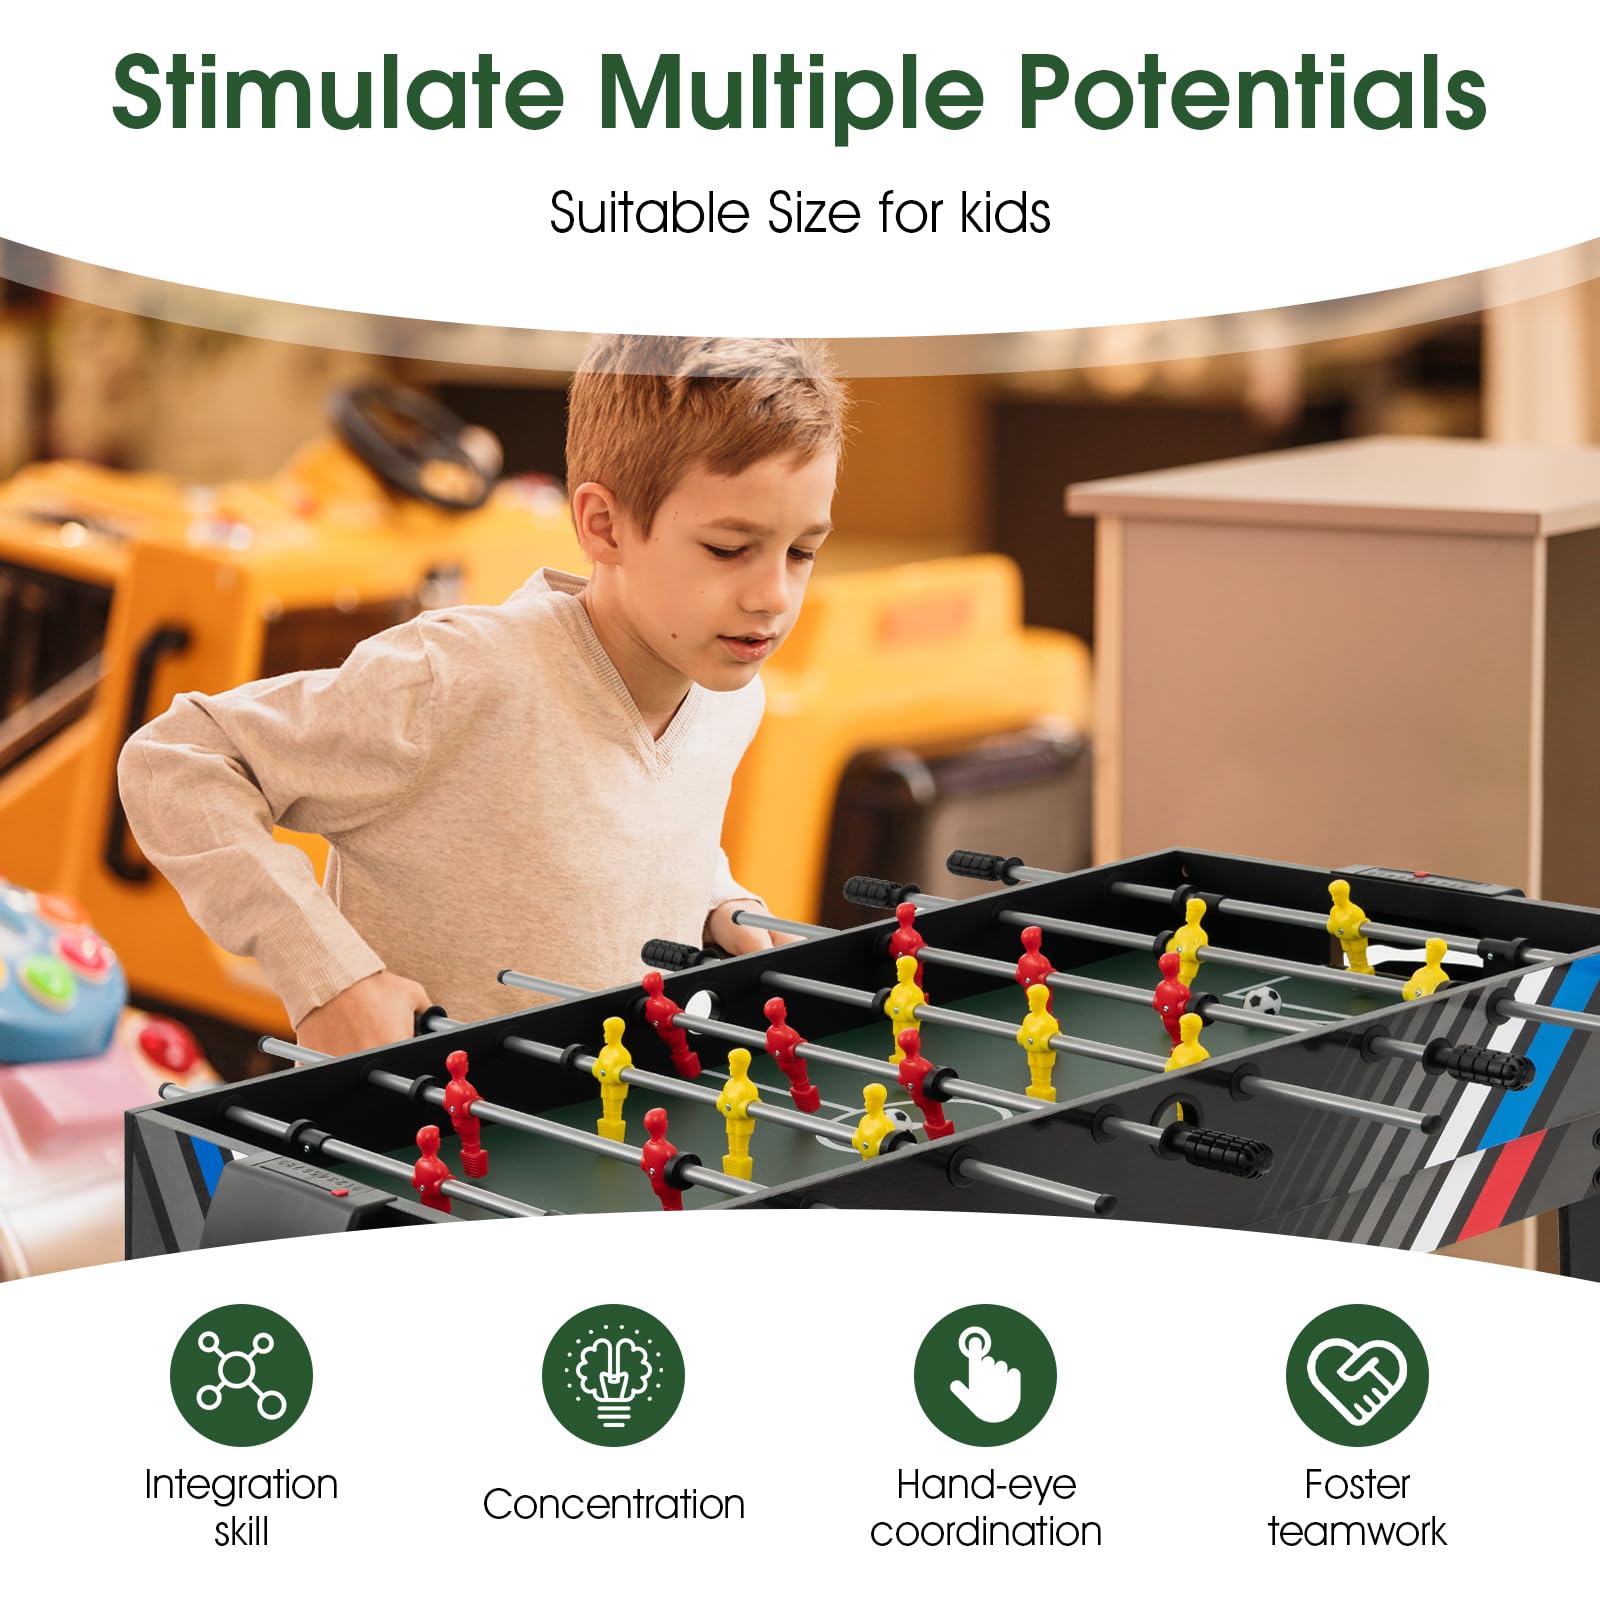 Giantex 4-in-1 Multi Game Table, 49 Inch Combination Game Tables with Adult Size Foosball Table